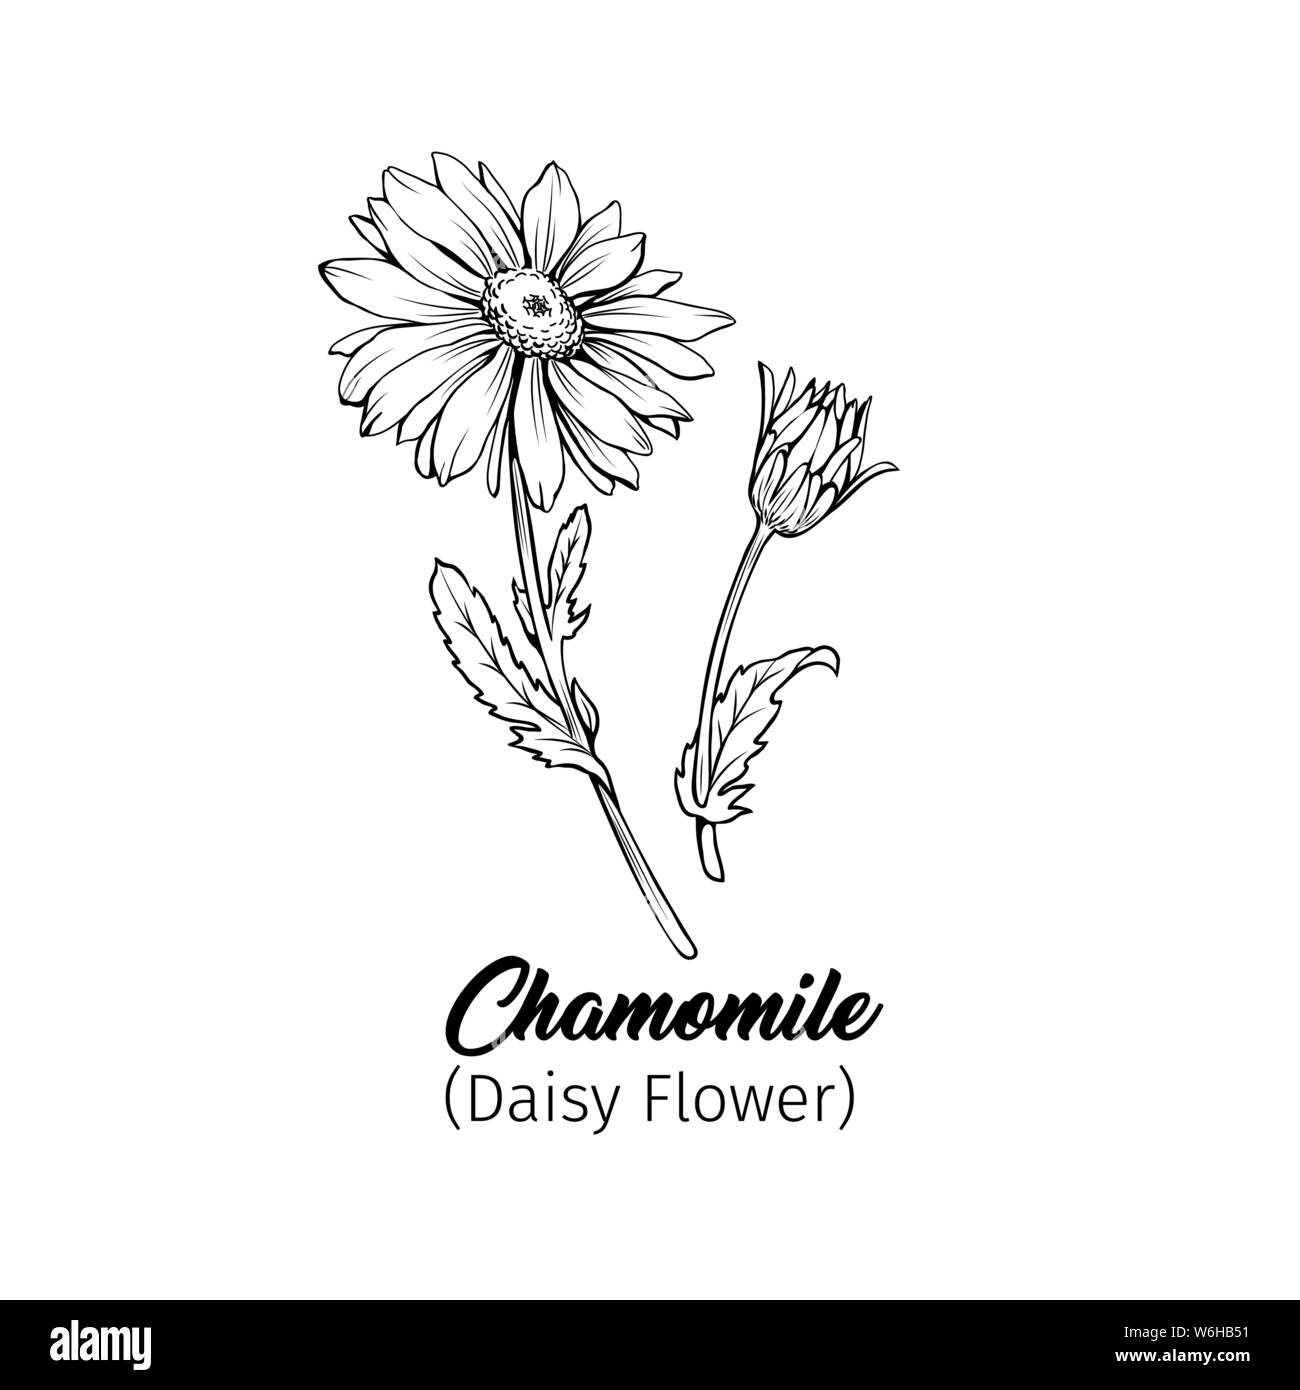 Daisy flower blossom freehand vector illustration. German chamomile, Matricaria chamomilla petals monochrome outline with title. Honey plant, wild flo Stock Vector